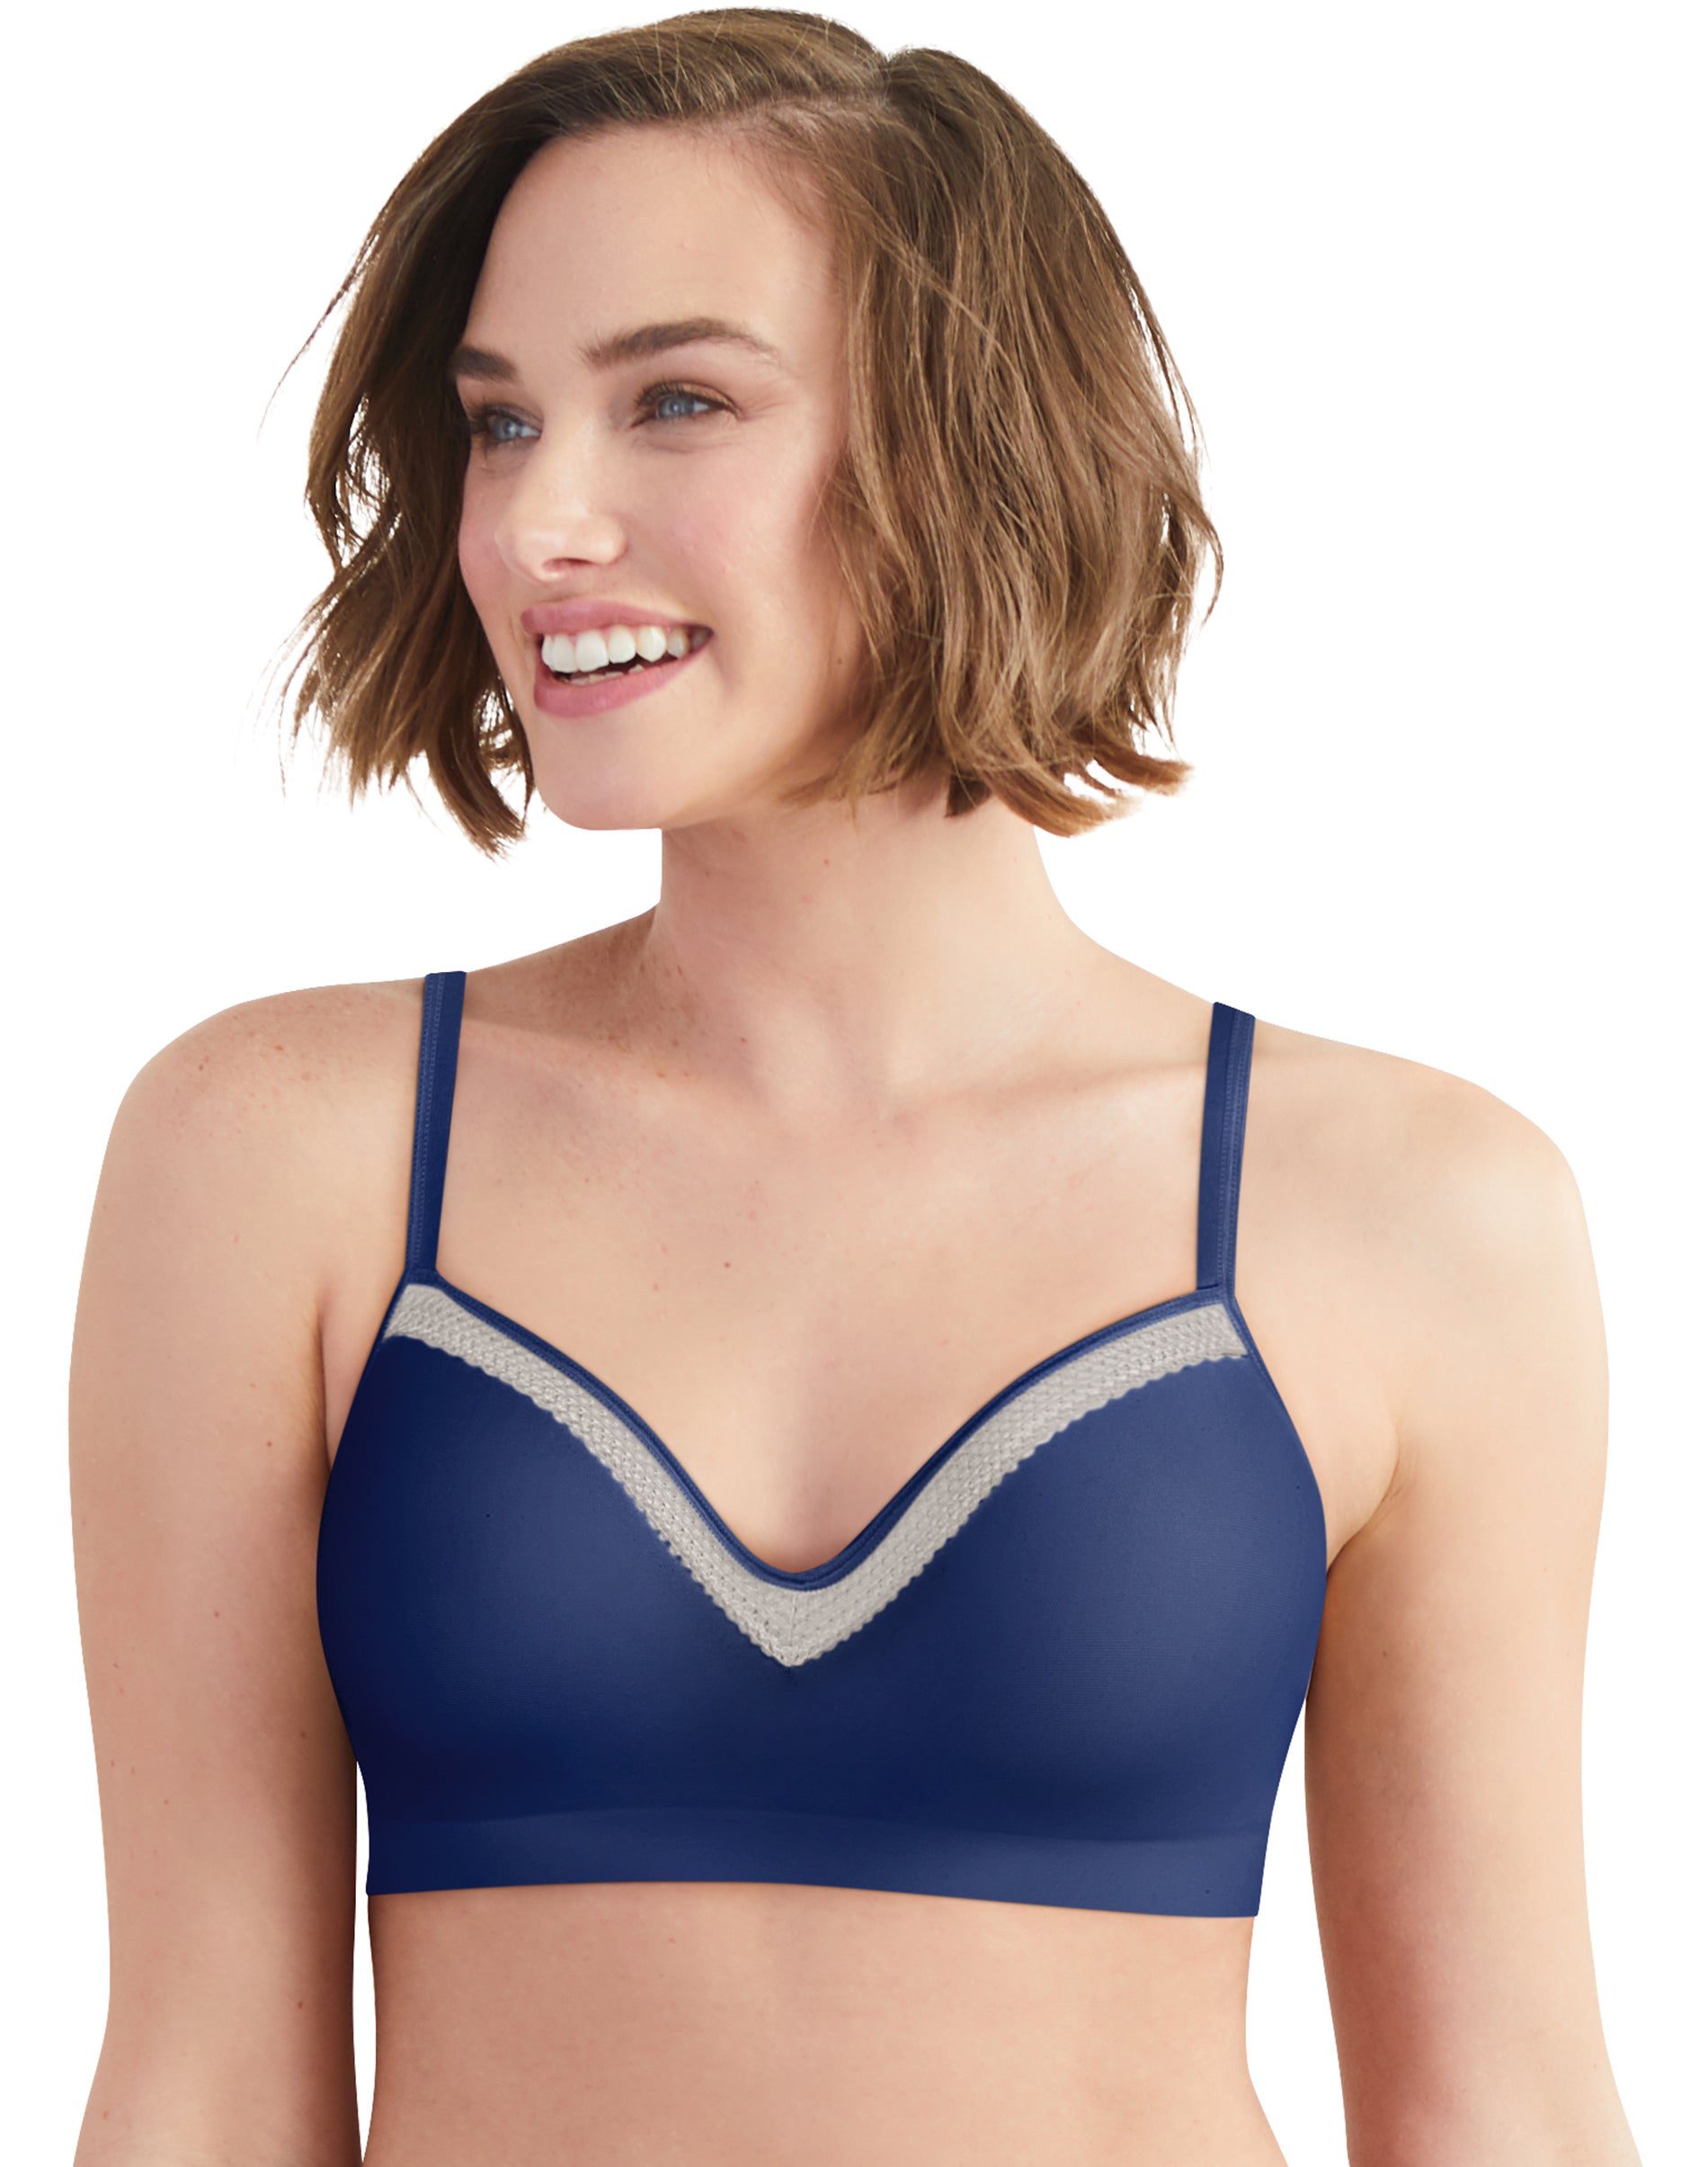 Hanes Womens Invisible Embrace Comfort Flex Fit Wirefree Bra, 3XL